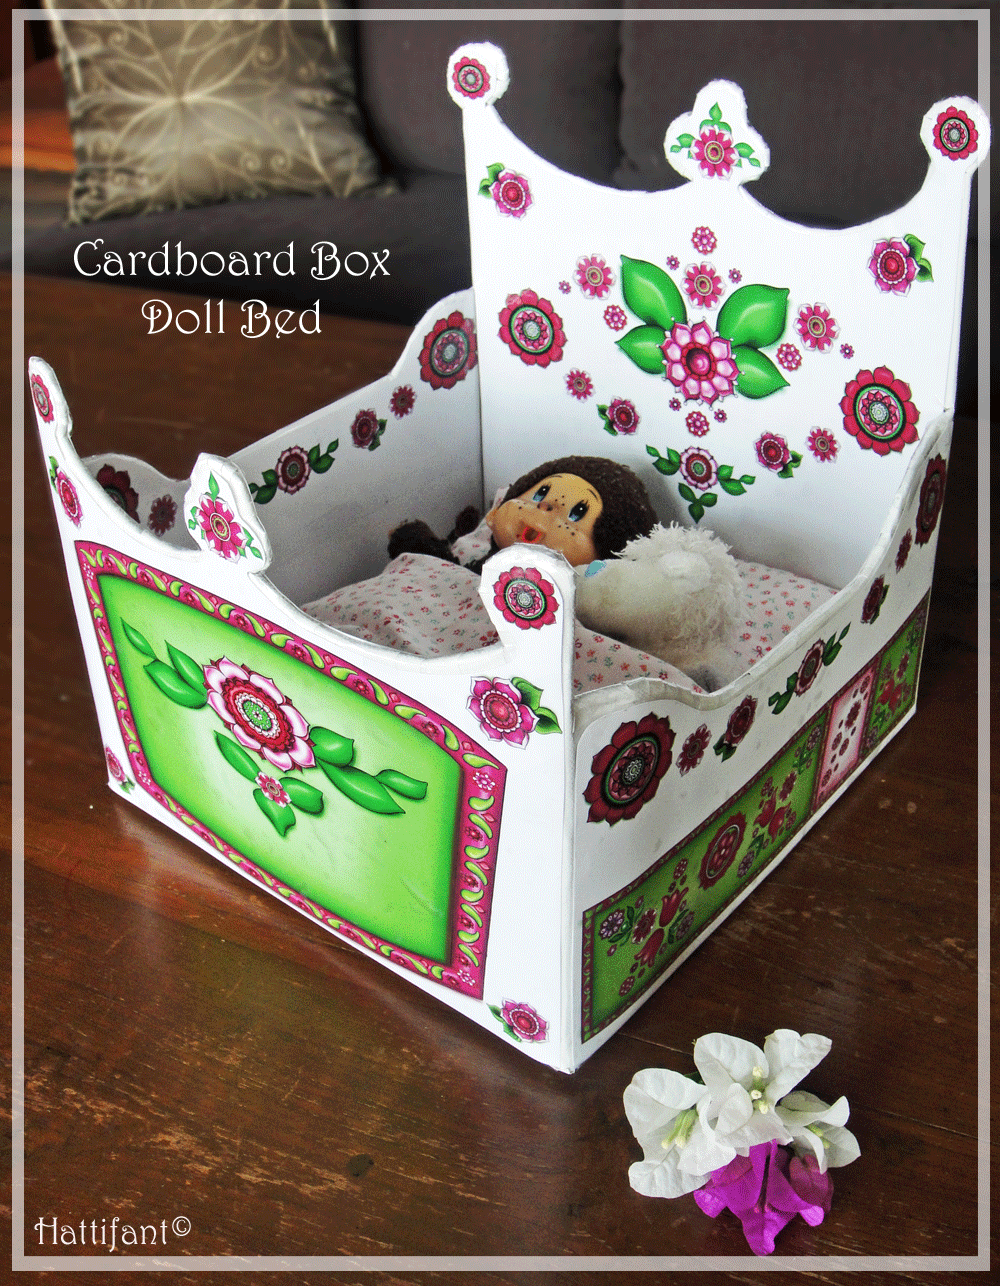 Click here for more on the Cardboard Box Doll Bed!